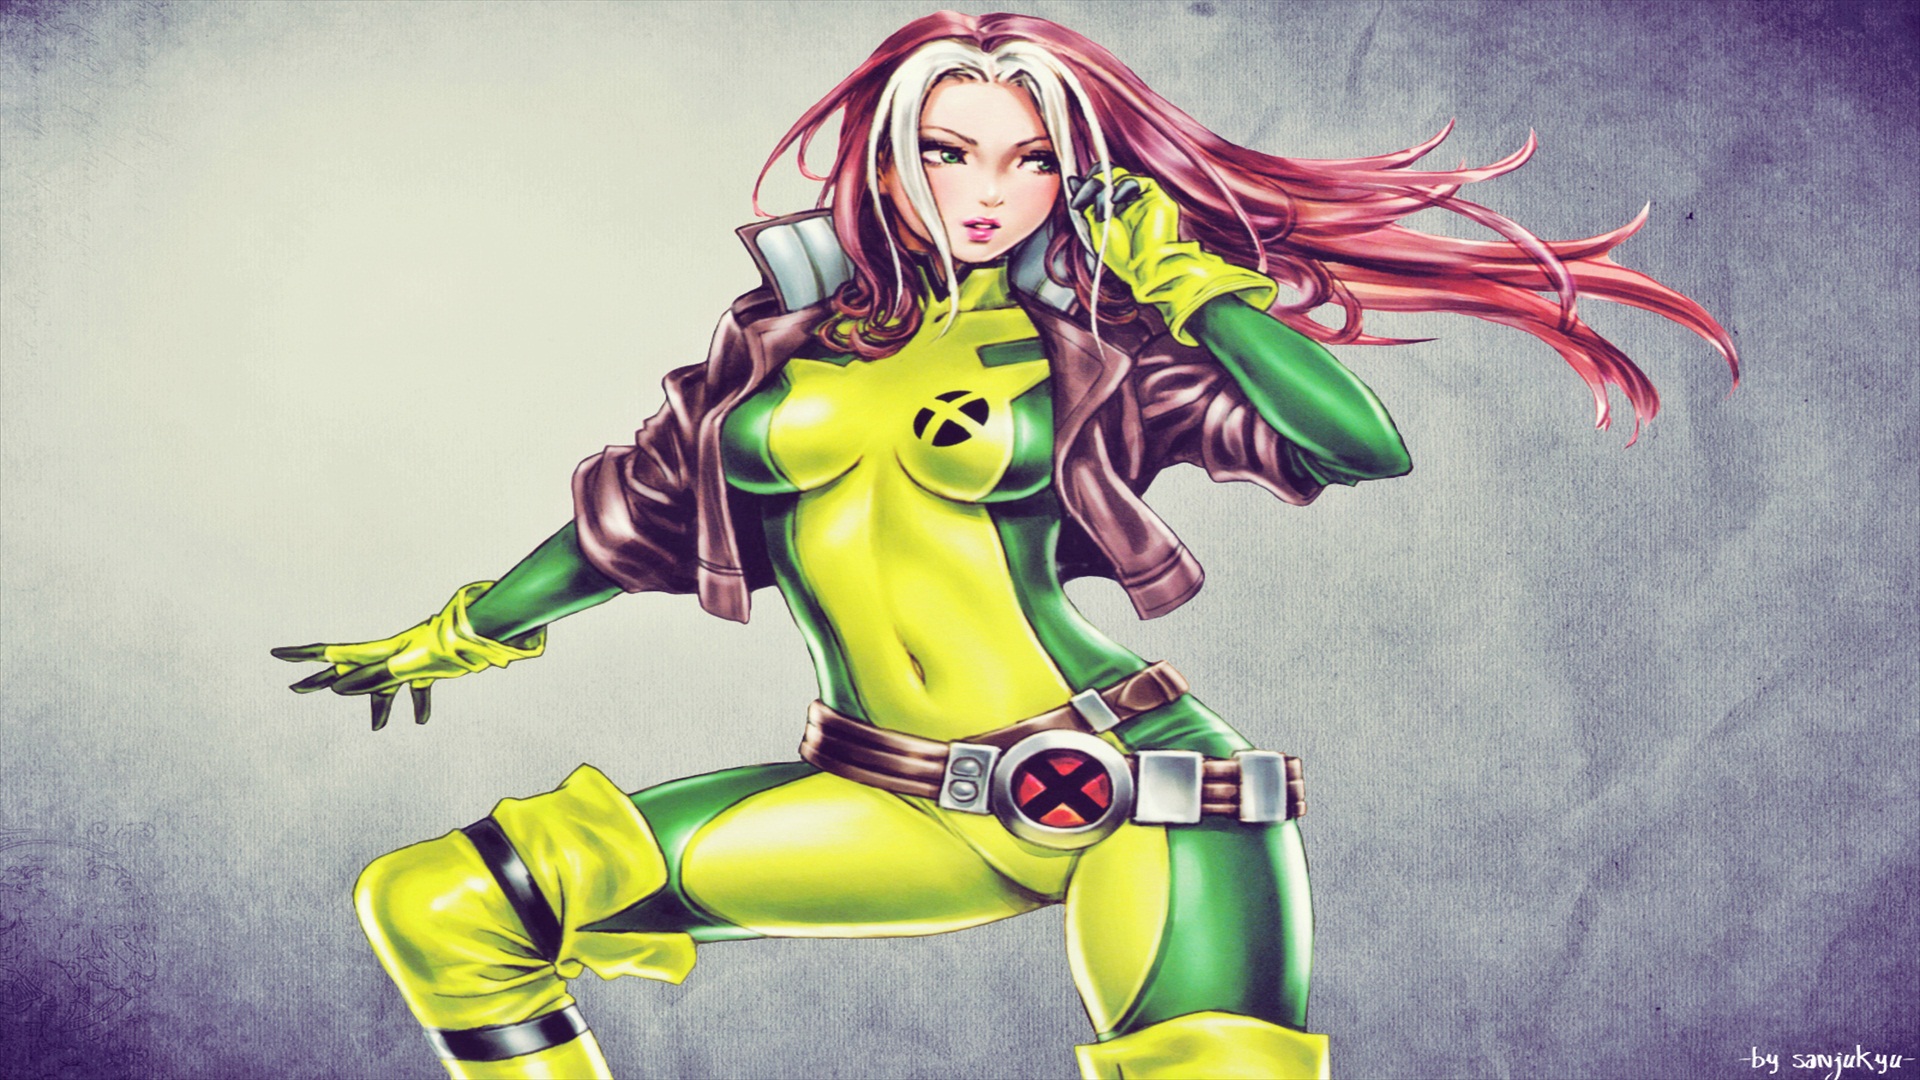 Rogue from X-Men, ready to unleash her mutant power.